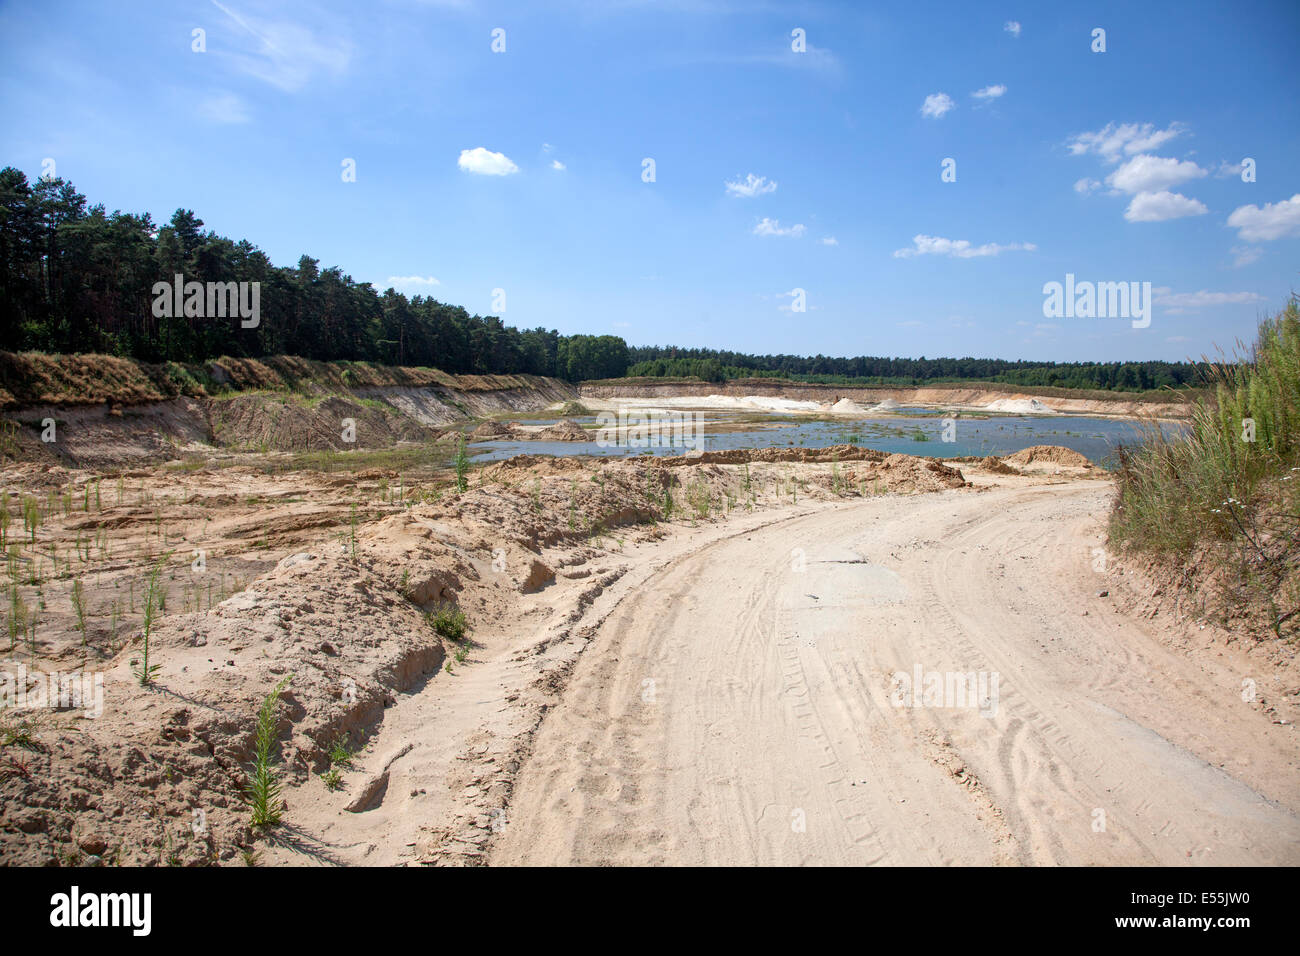 Degradation of Polish field into a sand pit pond made by mining sand for construction. Zawady Poland Stock Photo